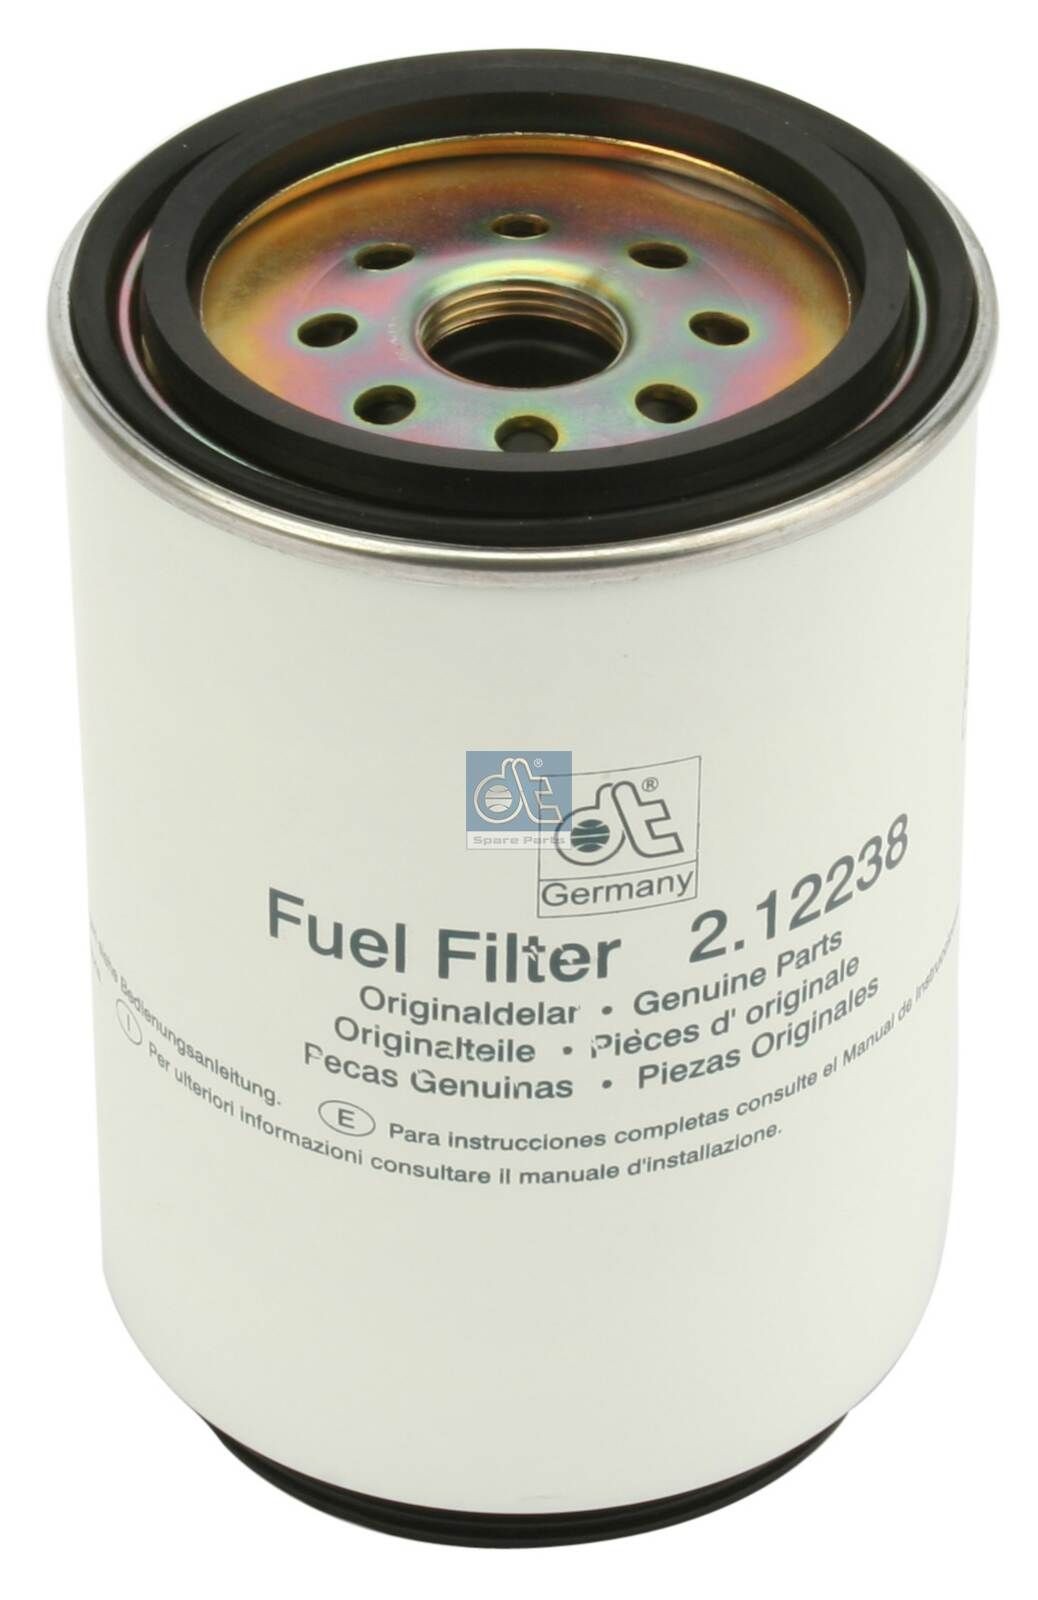 WK 1060/5 x DT Spare Parts 2.12238 Fuel filter 3989 632